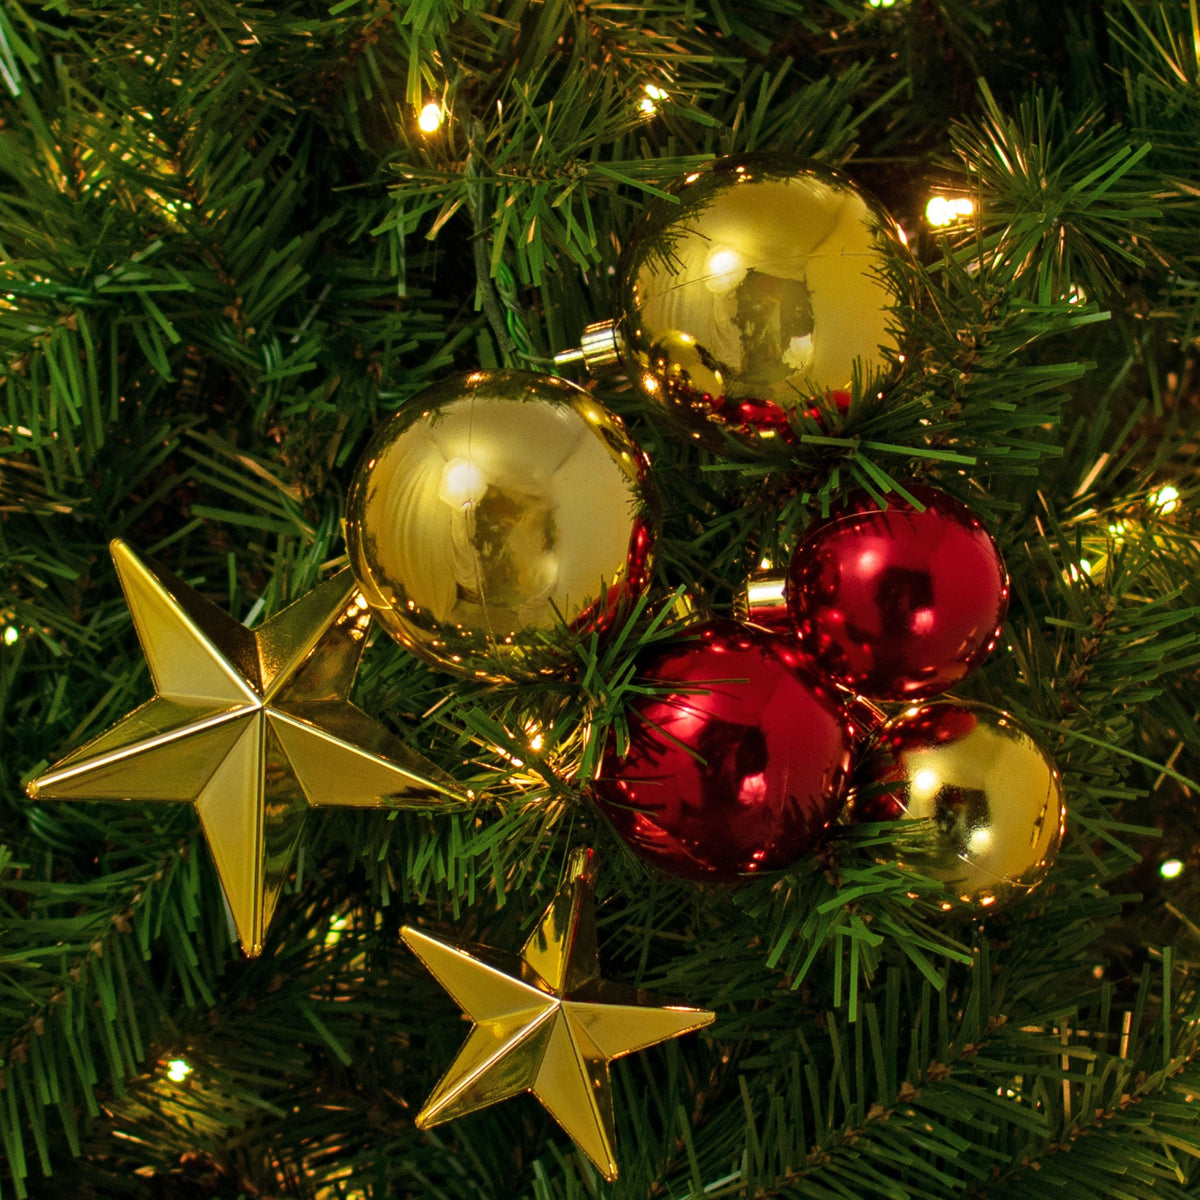 Classic Christmas Ball Clusters with Shiny Gold & Red Ornaments & Gold Stars are beautiful for decorating your Christmas Trees, Garlands, and Wreaths